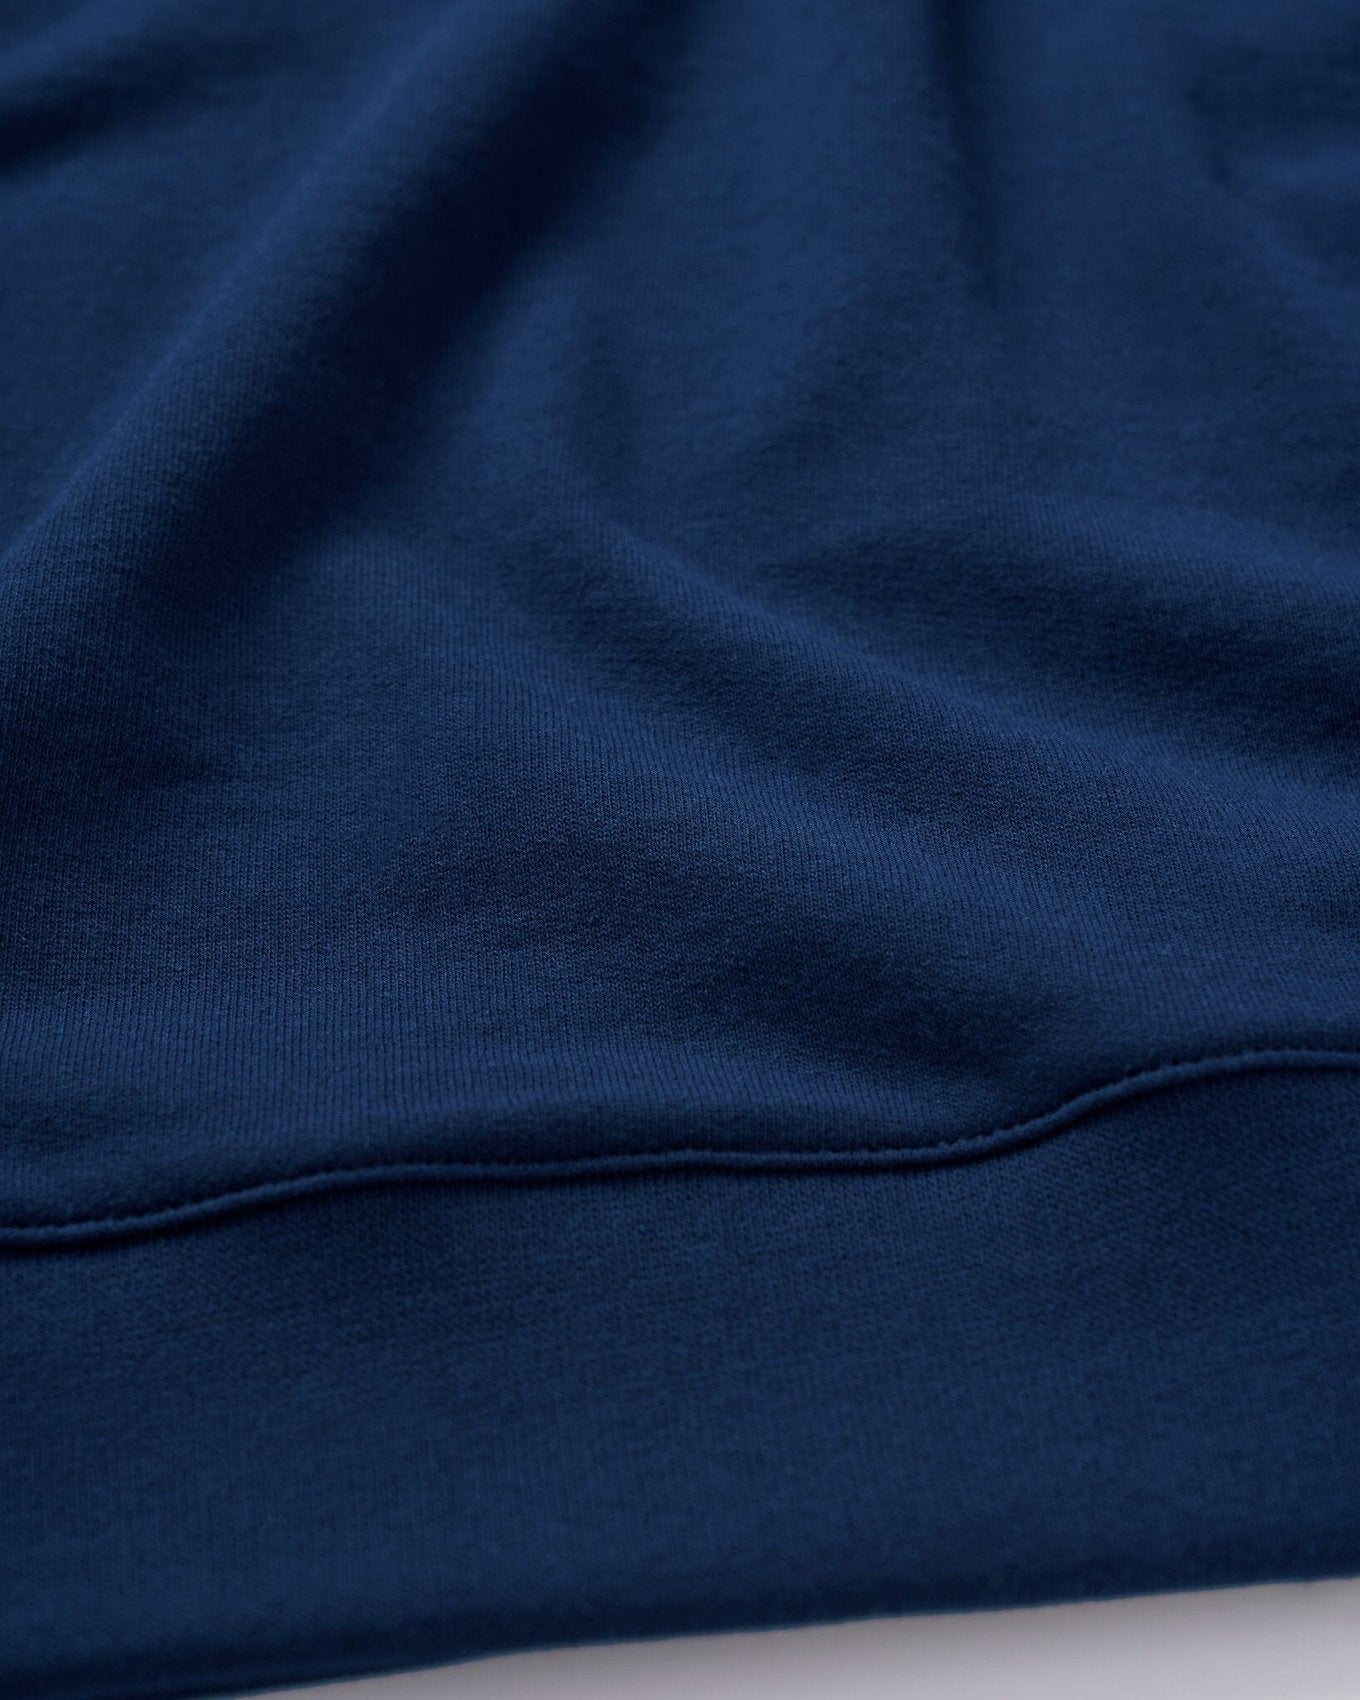 ReApparel Basura Crew Neck . in color Navy Blue and shape long sleeve